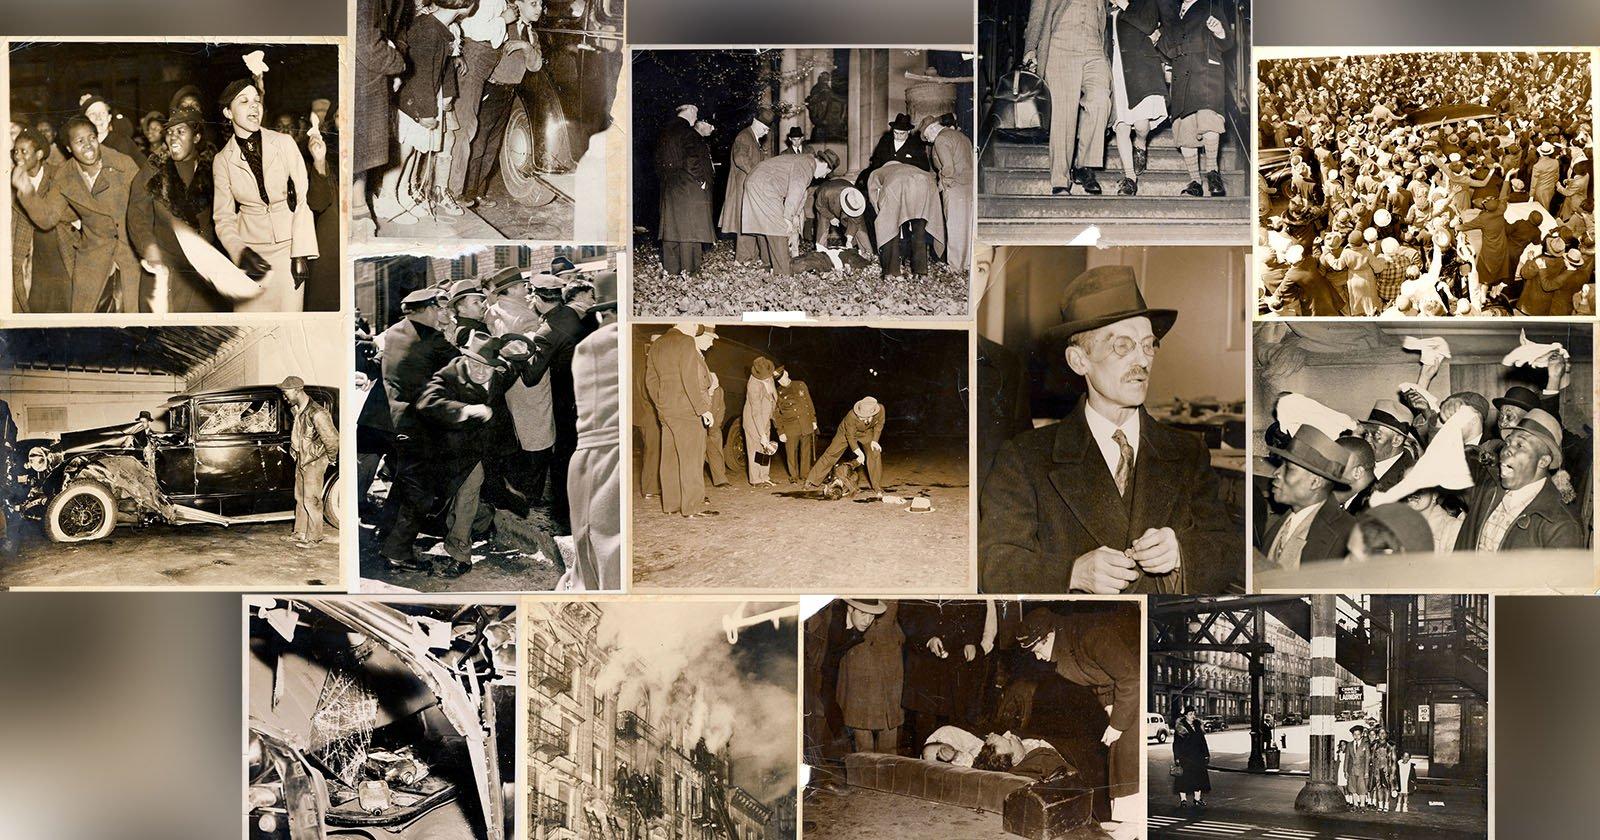 Man Finds Box of Unseen Weegee Photo in His Kitchen Cabinet